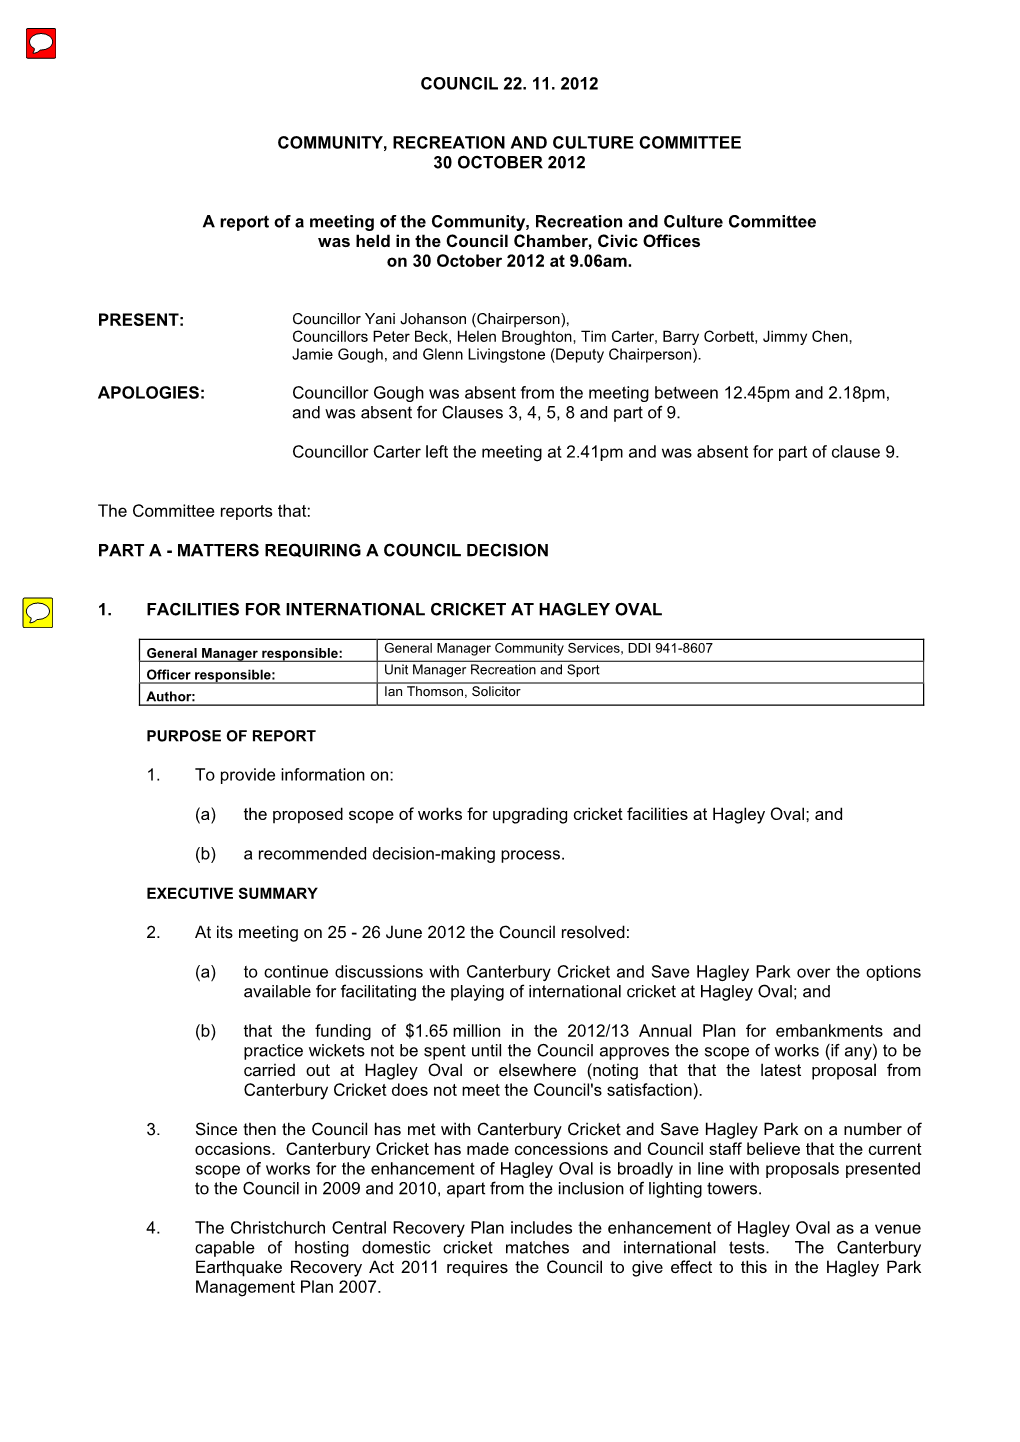 Report to Council 30 October 2012